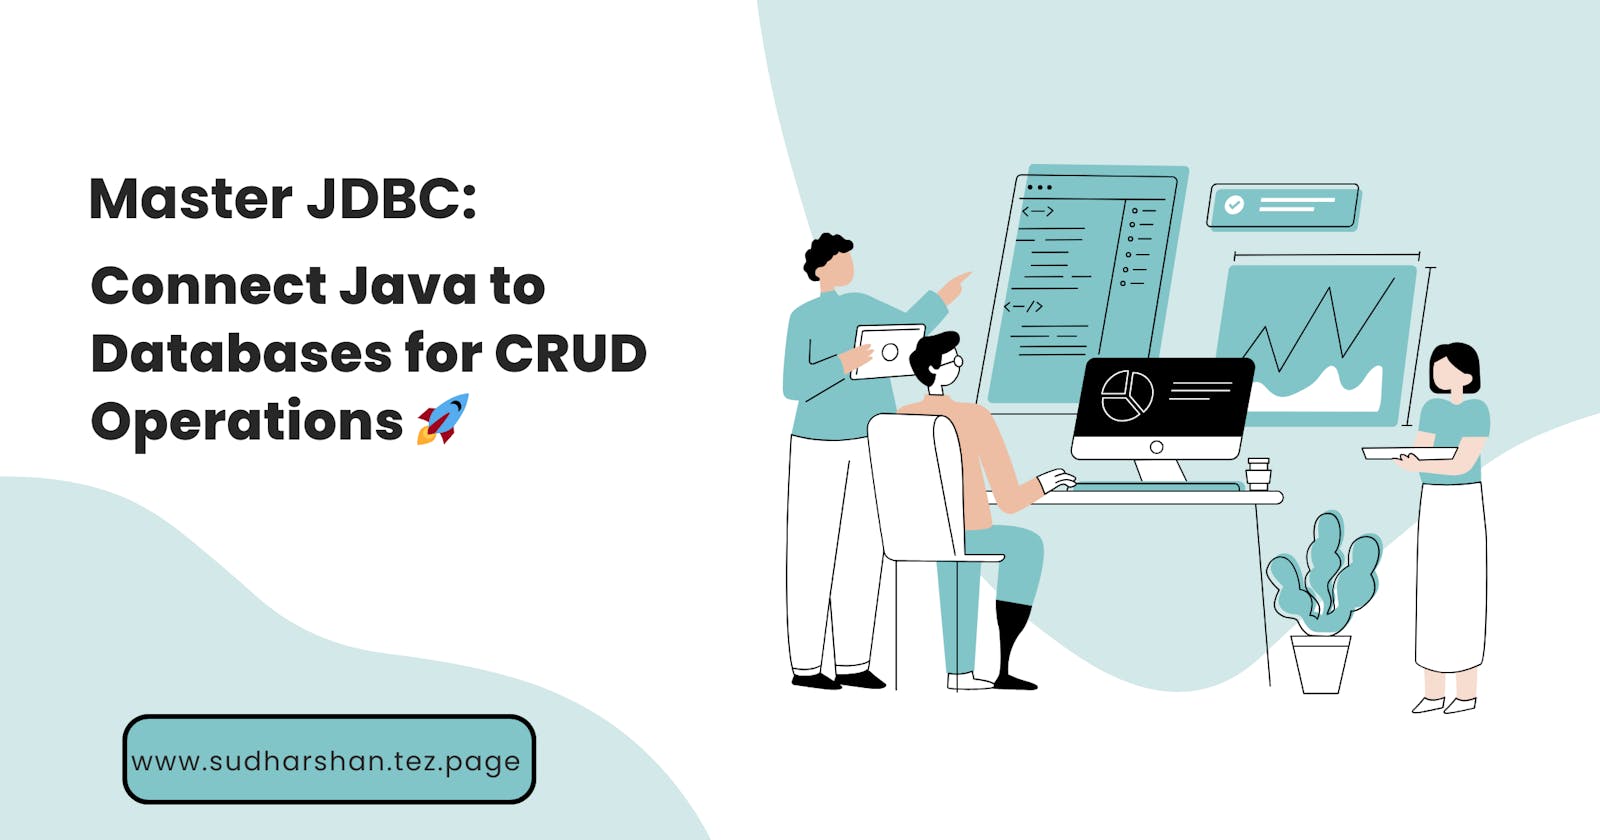 Master JDBC: Connect Java to Databases for CRUD Operations